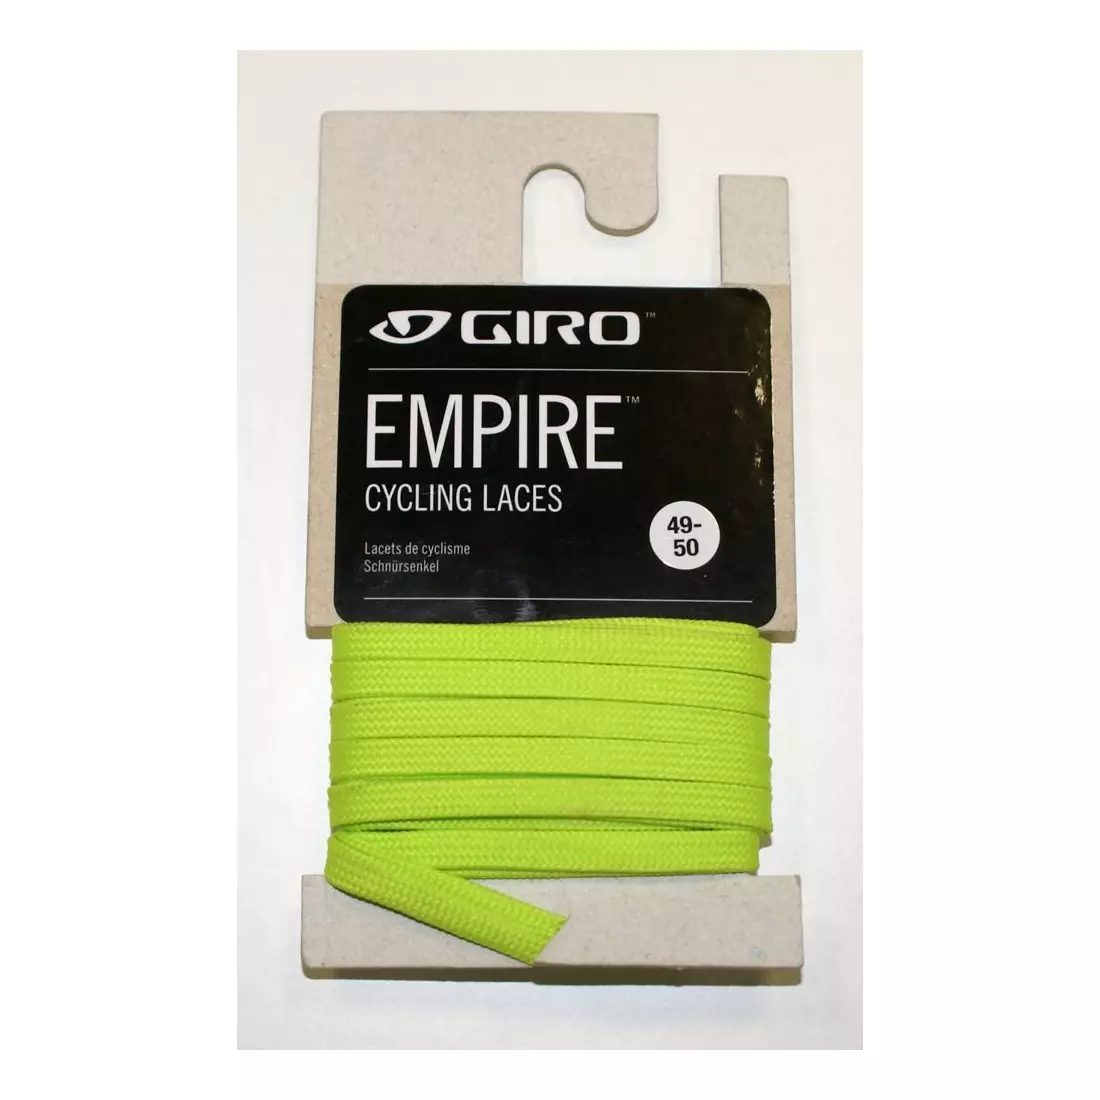 GIRO laces for cycling shoes EMPIRE LACES puke green GR-7084151